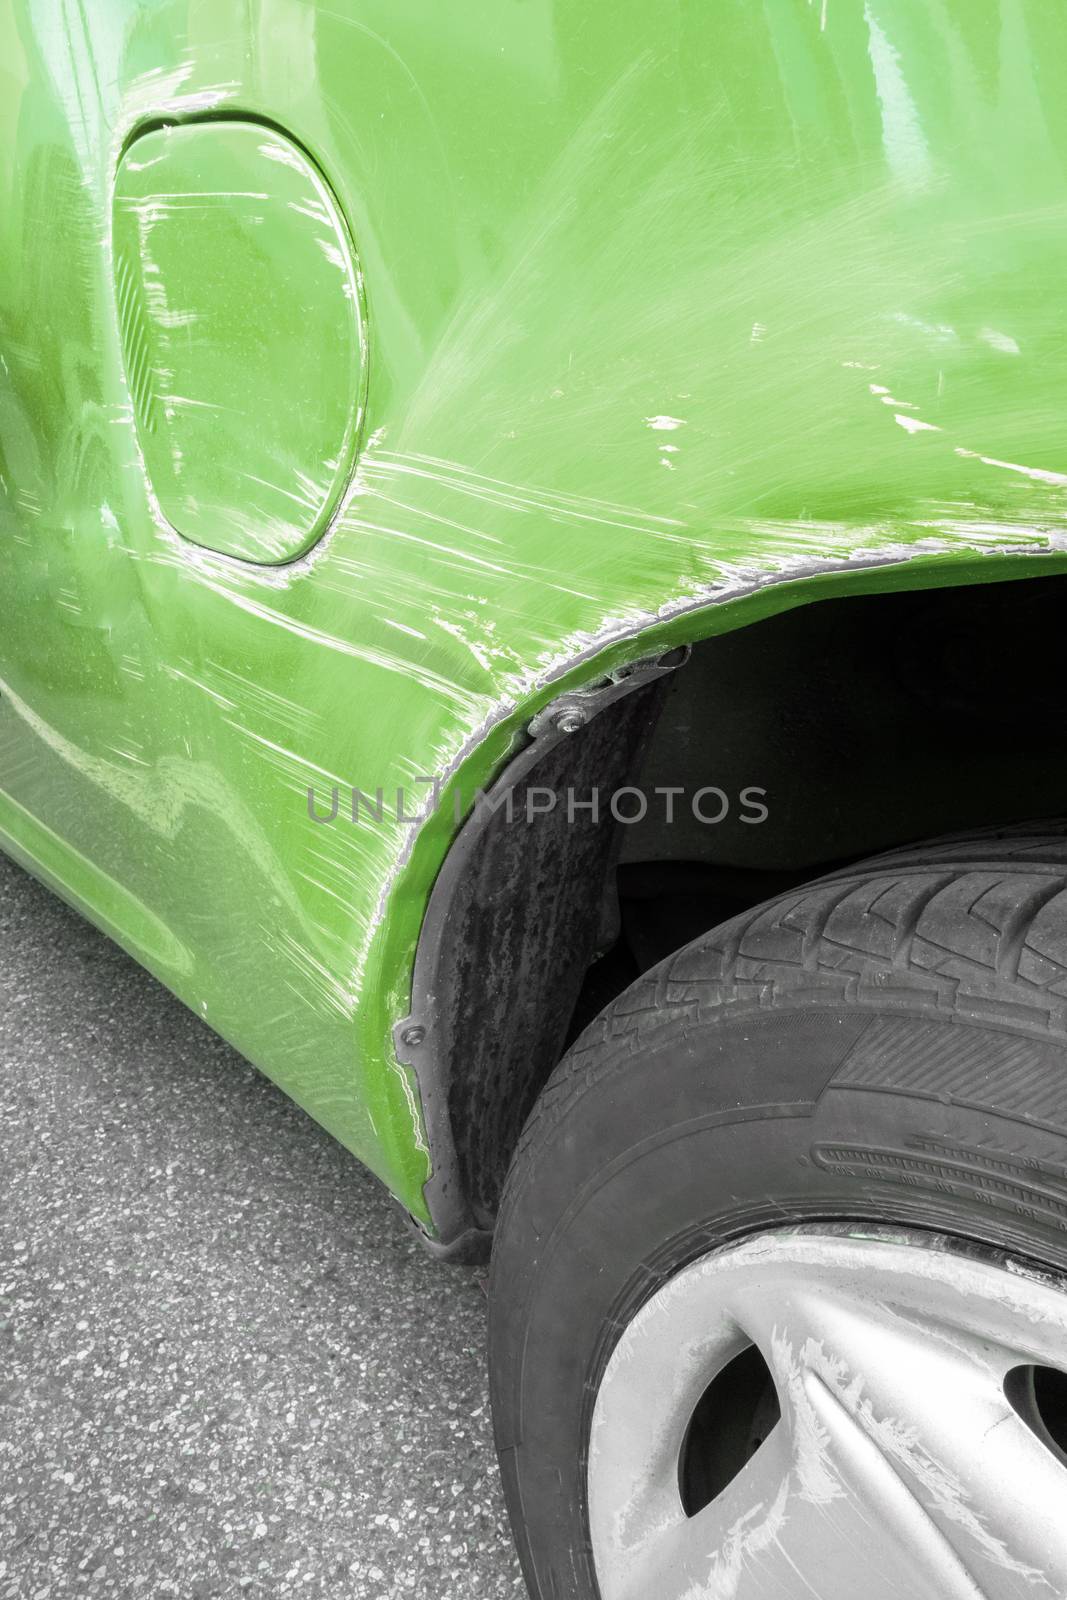 Generic green car with scratched paint and dented body in crash accident or parking lot.